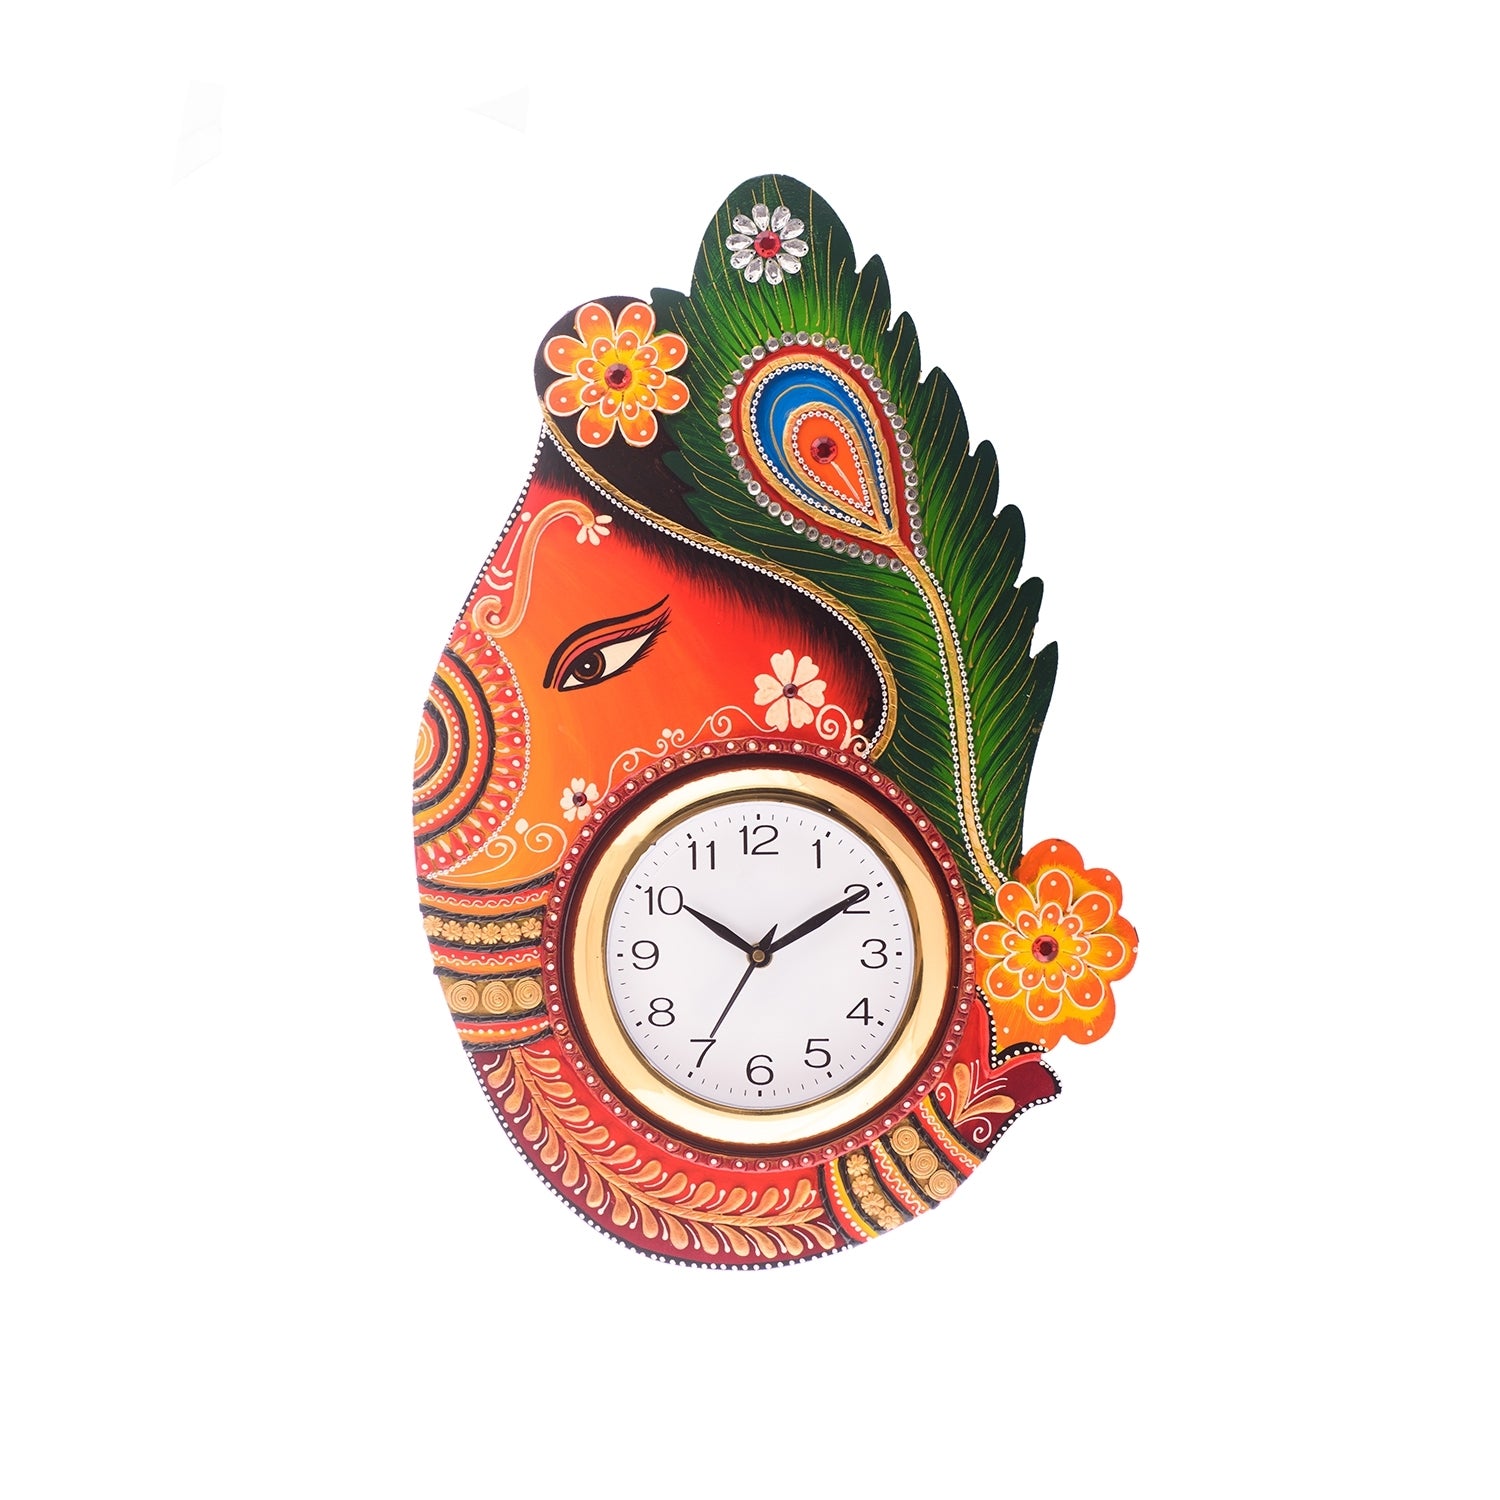 Colorful Handicrafted Paper Mache Wooden Turban Lord Ganesha Wall Clock